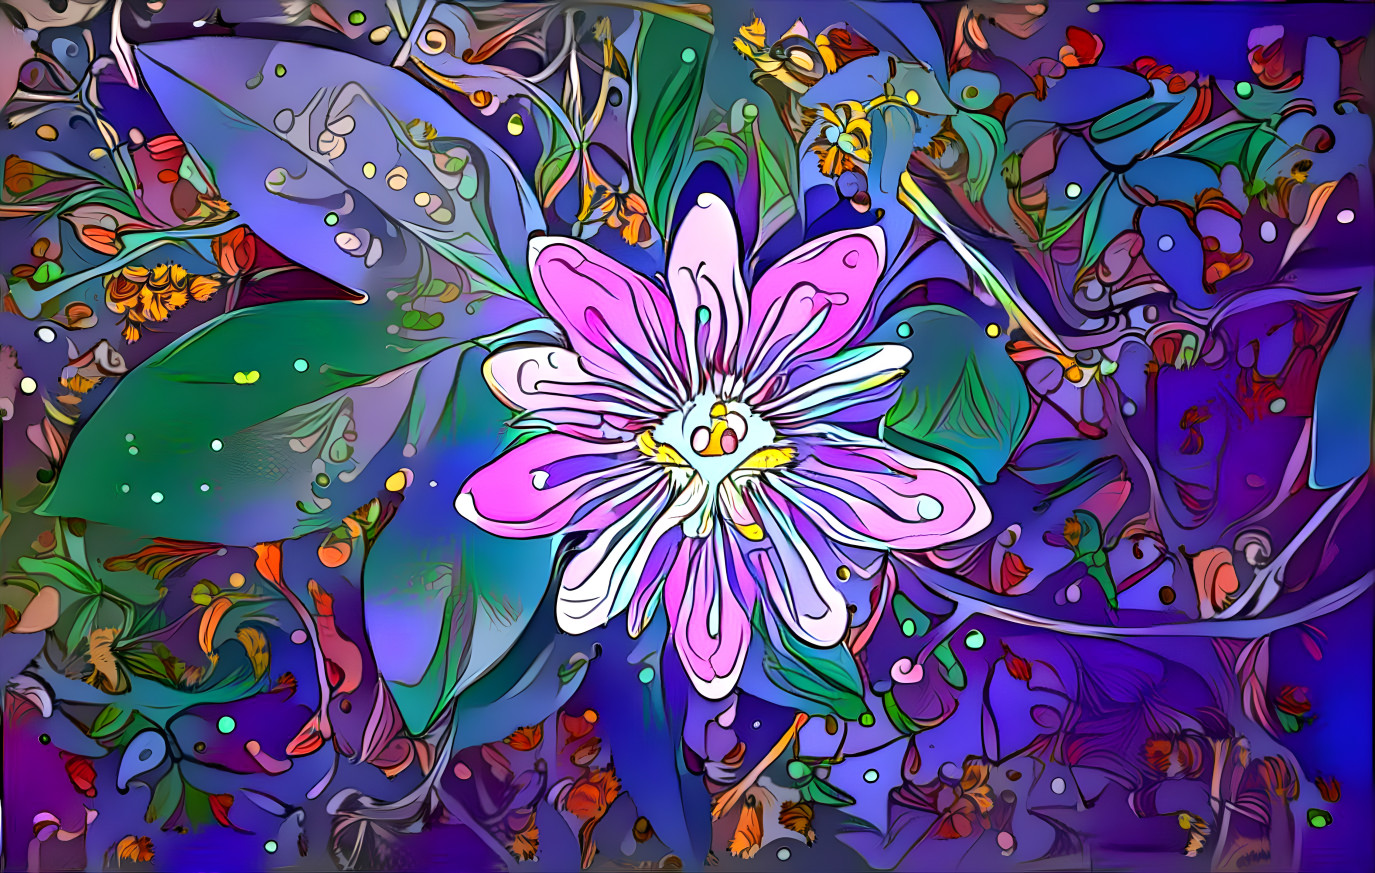 Passion flower from original photo